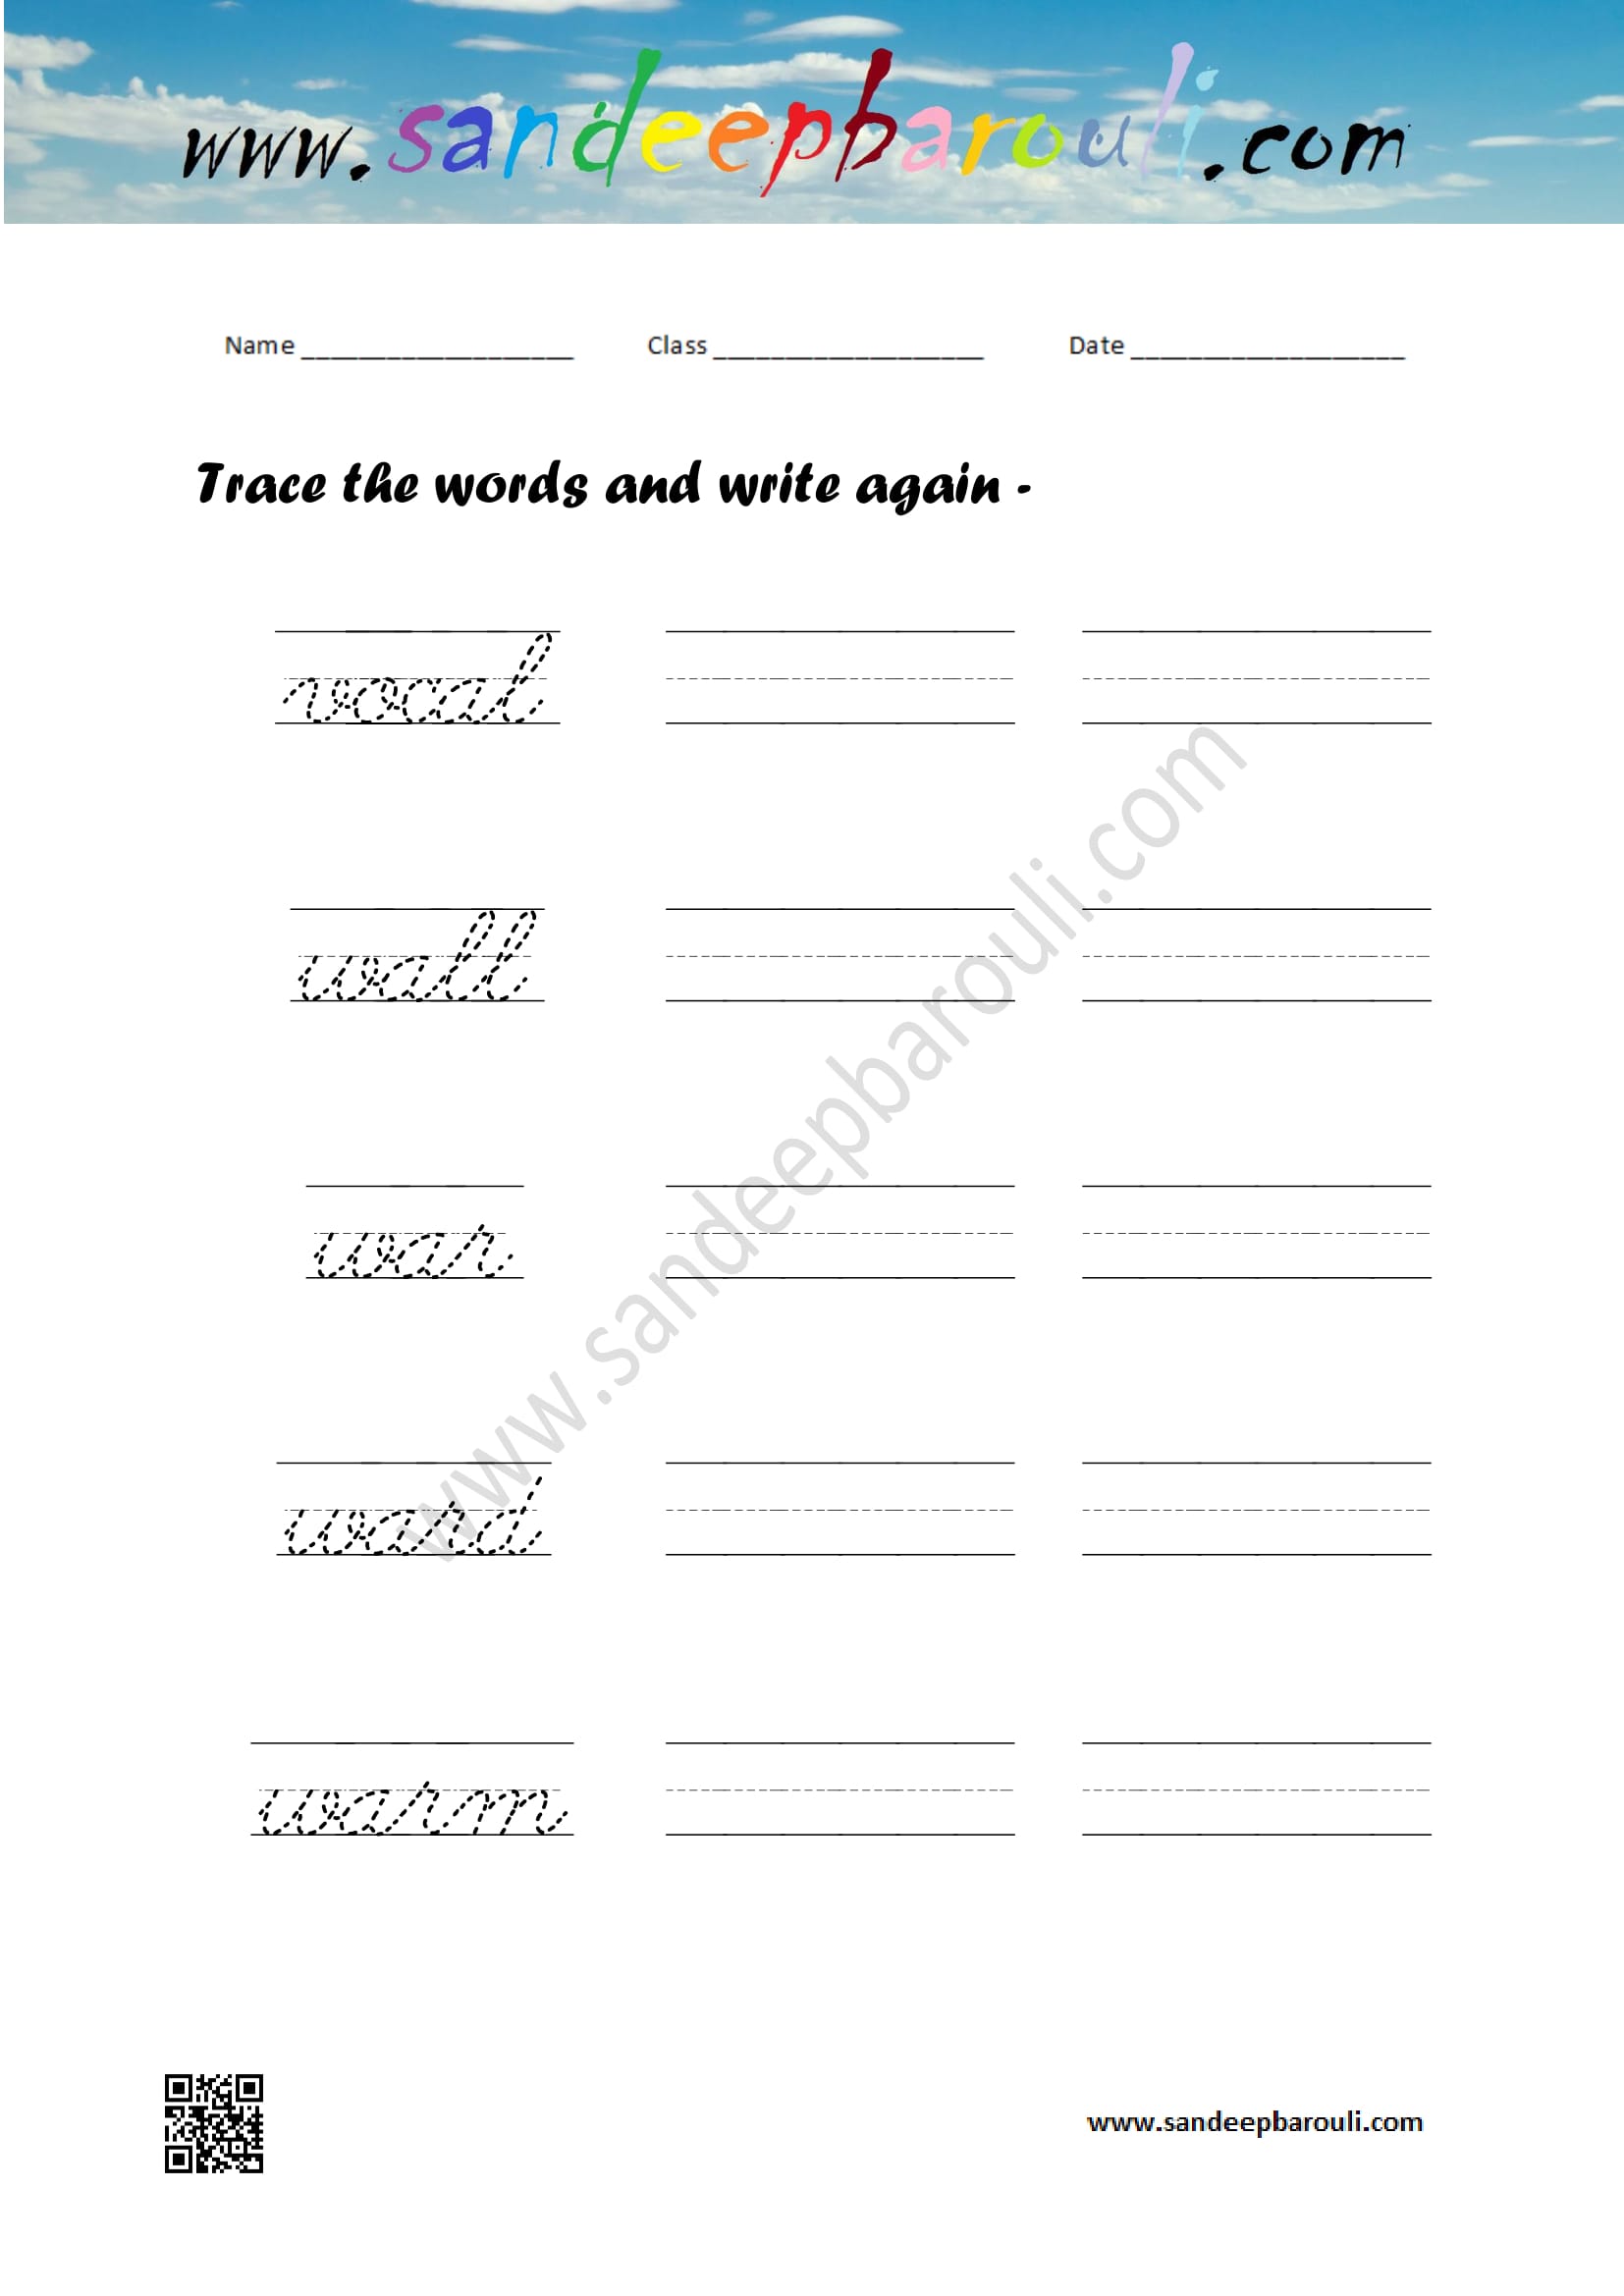 Cursive writing worksheet – trace the words and write again (61)